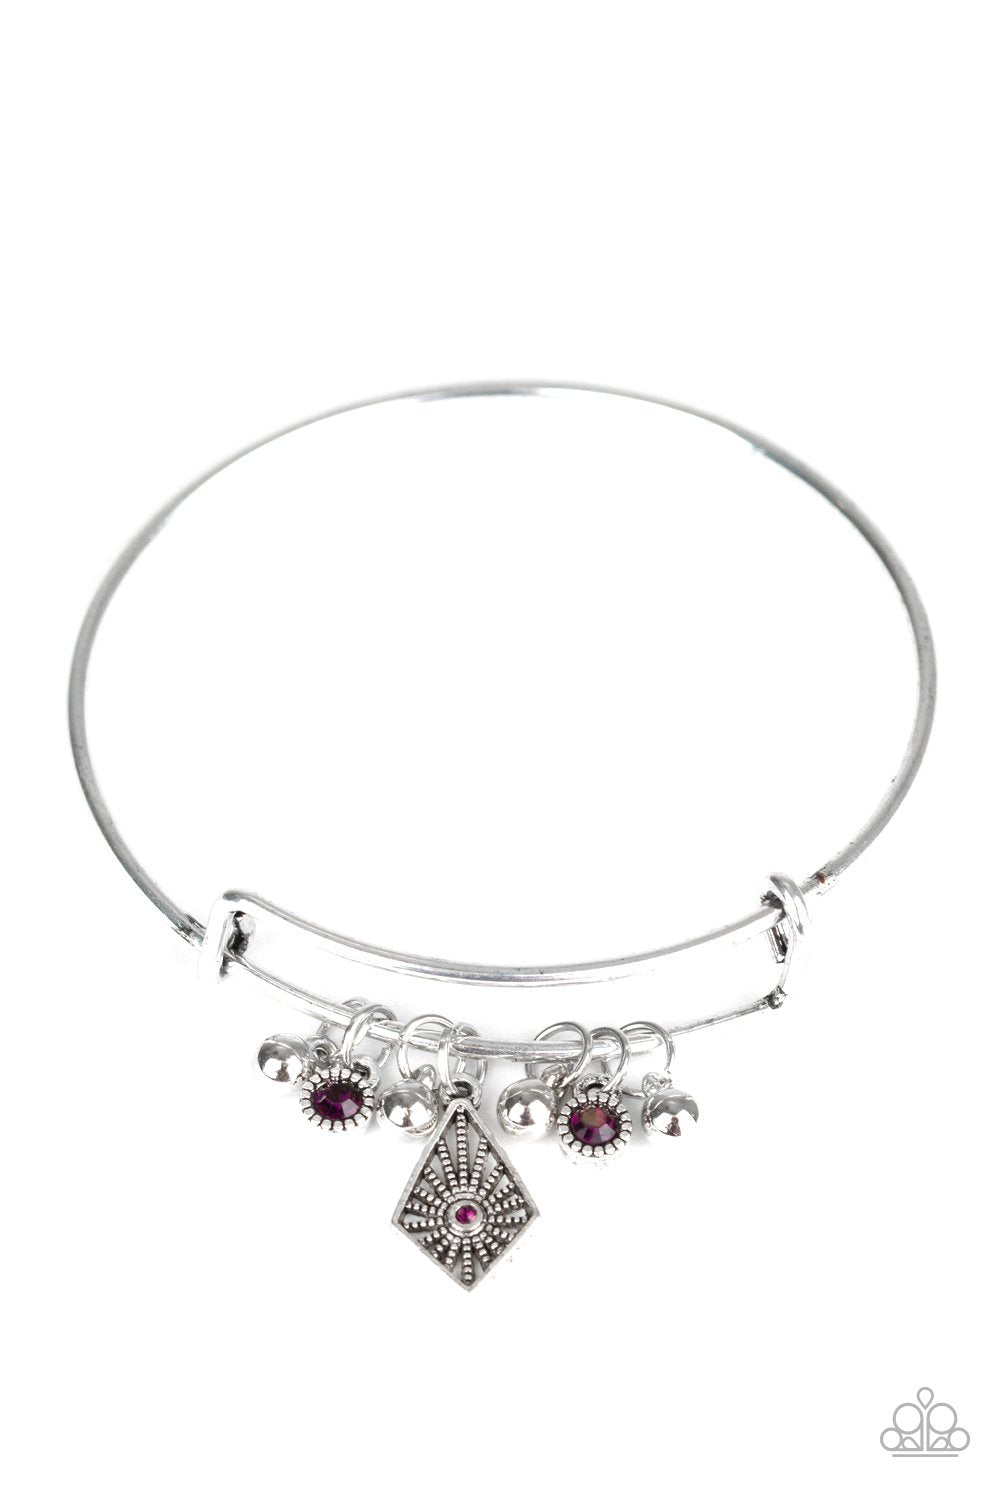 Treasure Charms Purple and Silver Charm Bangle Bracelet - Paparazzi Accessories-CarasShop.com - $5 Jewelry by Cara Jewels